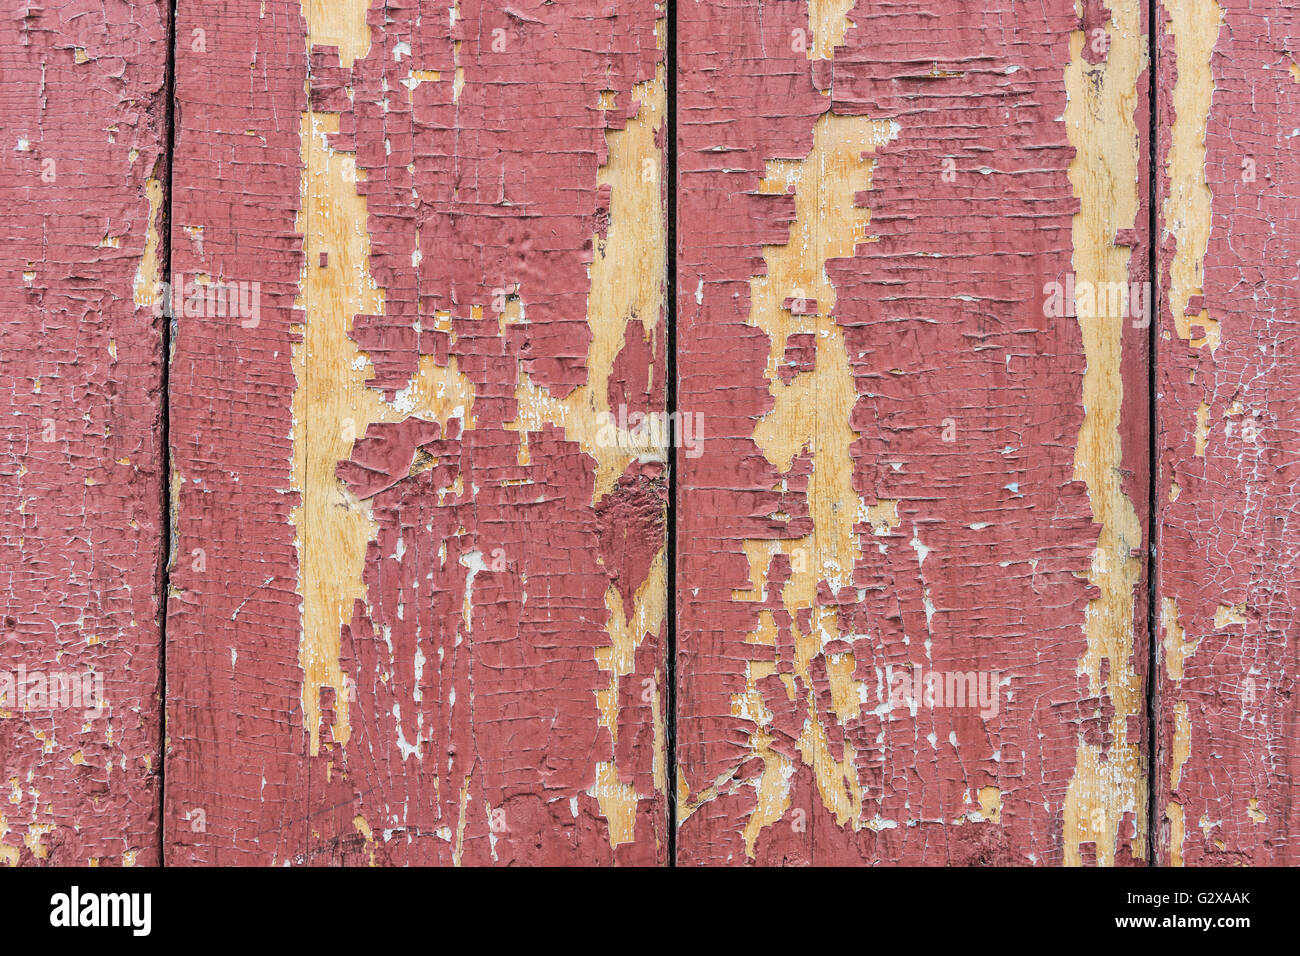 Details of an old red wooden wall Stock Photo